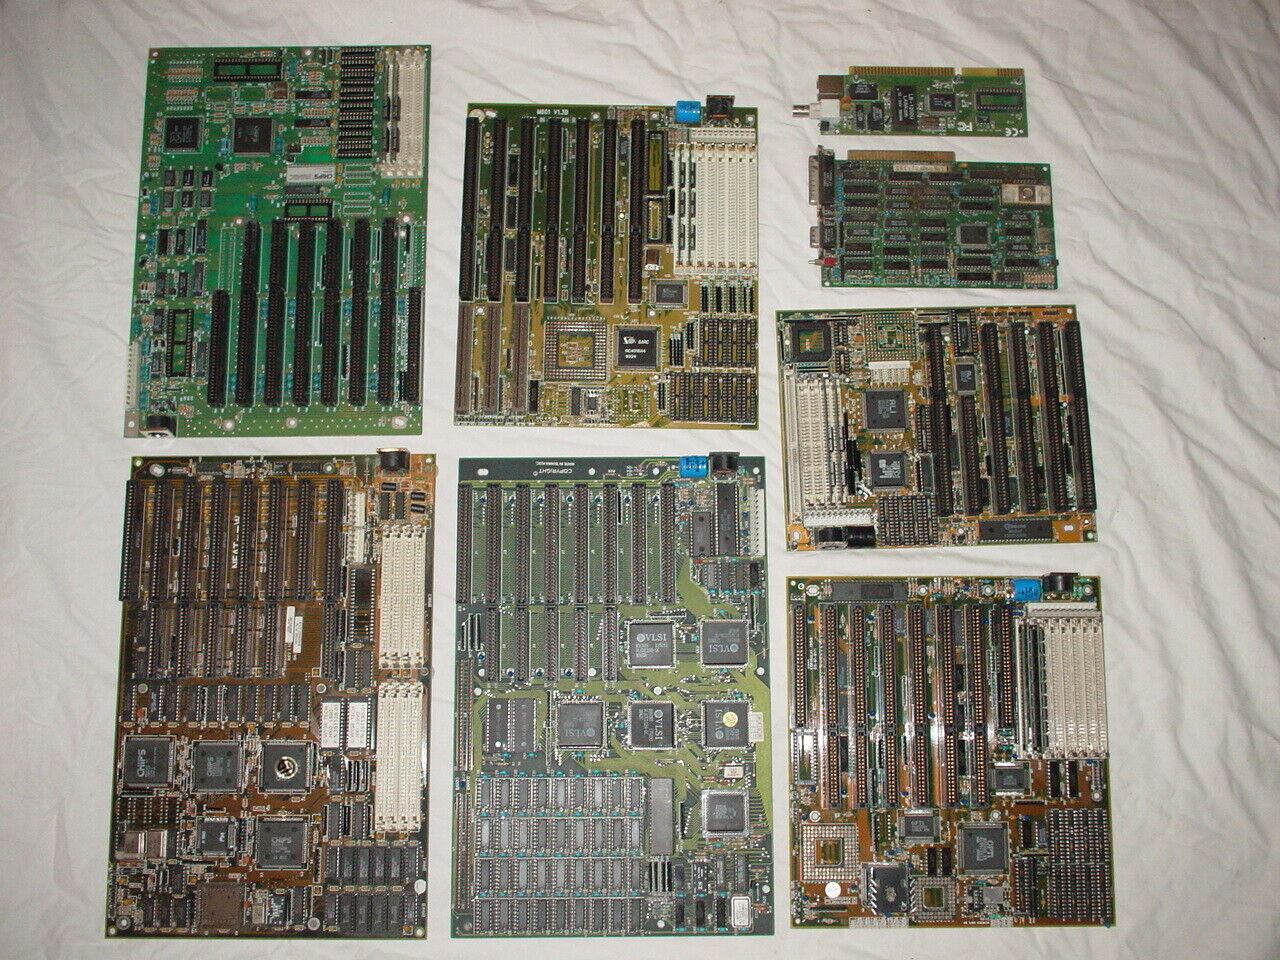 6 Pcs AMD INTEL 80286-12 am386 486 ISA Motherboards with CPU MEMORY VINTAGE RARE